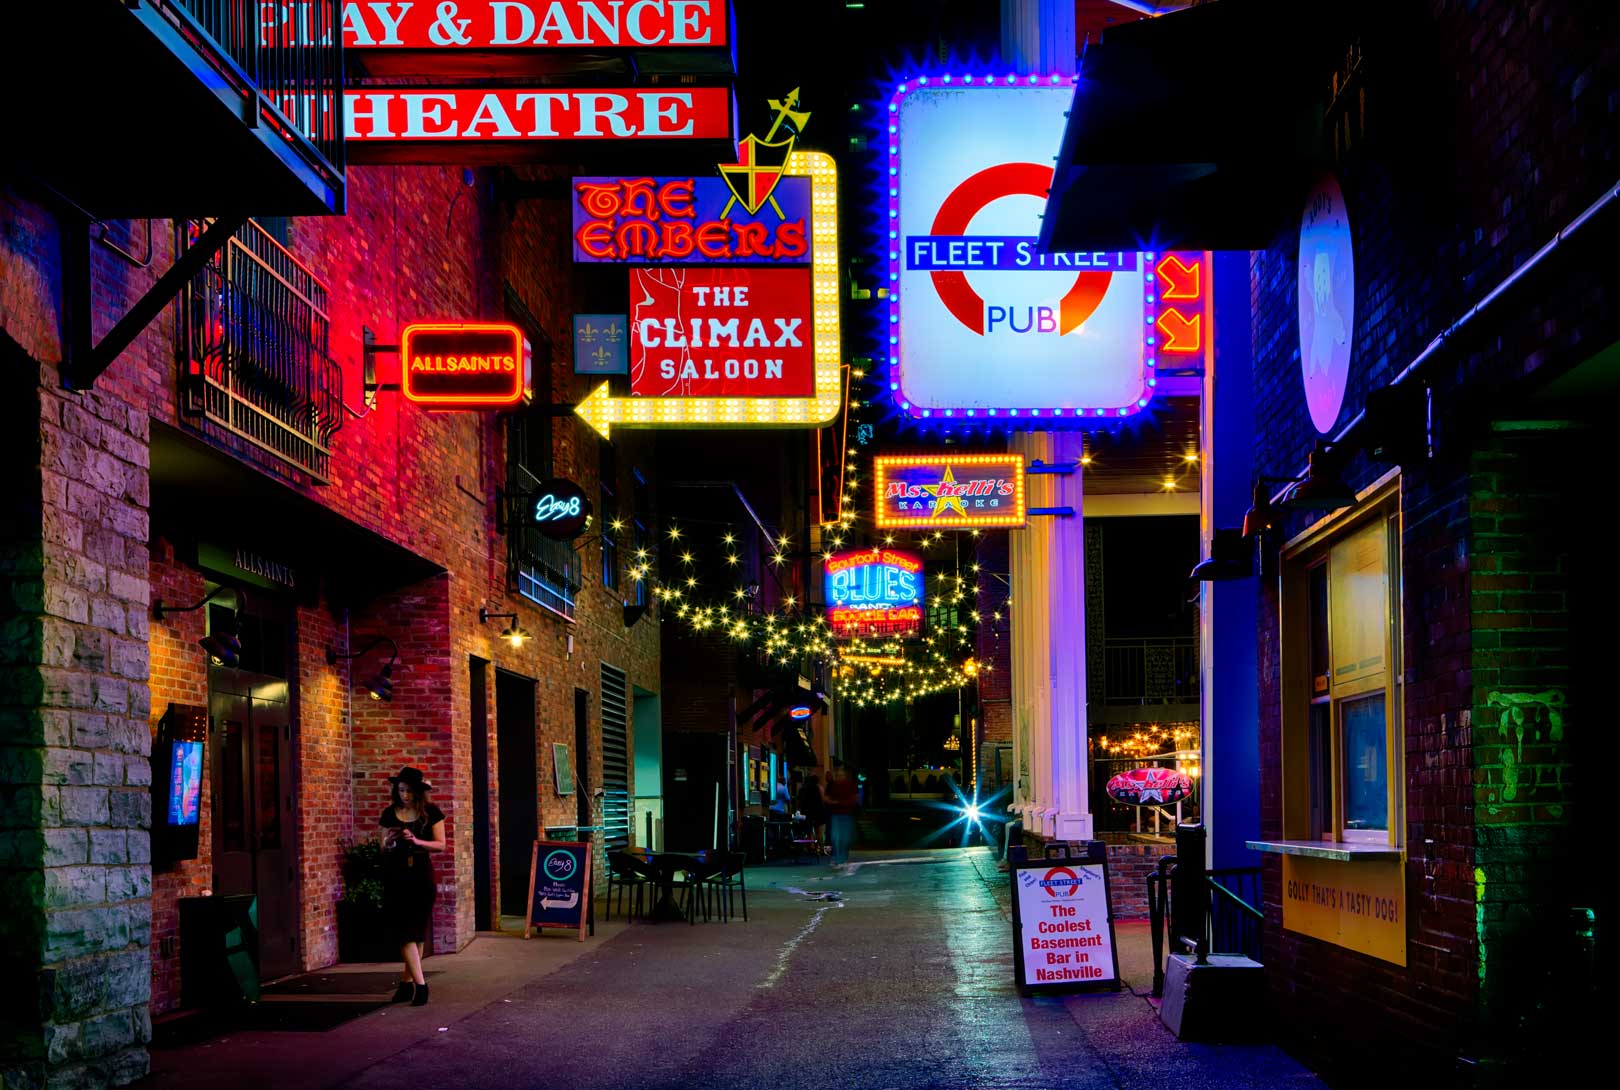 Bright signs of nightclubs lit up at night on old brick buildings along the Printers Alley district